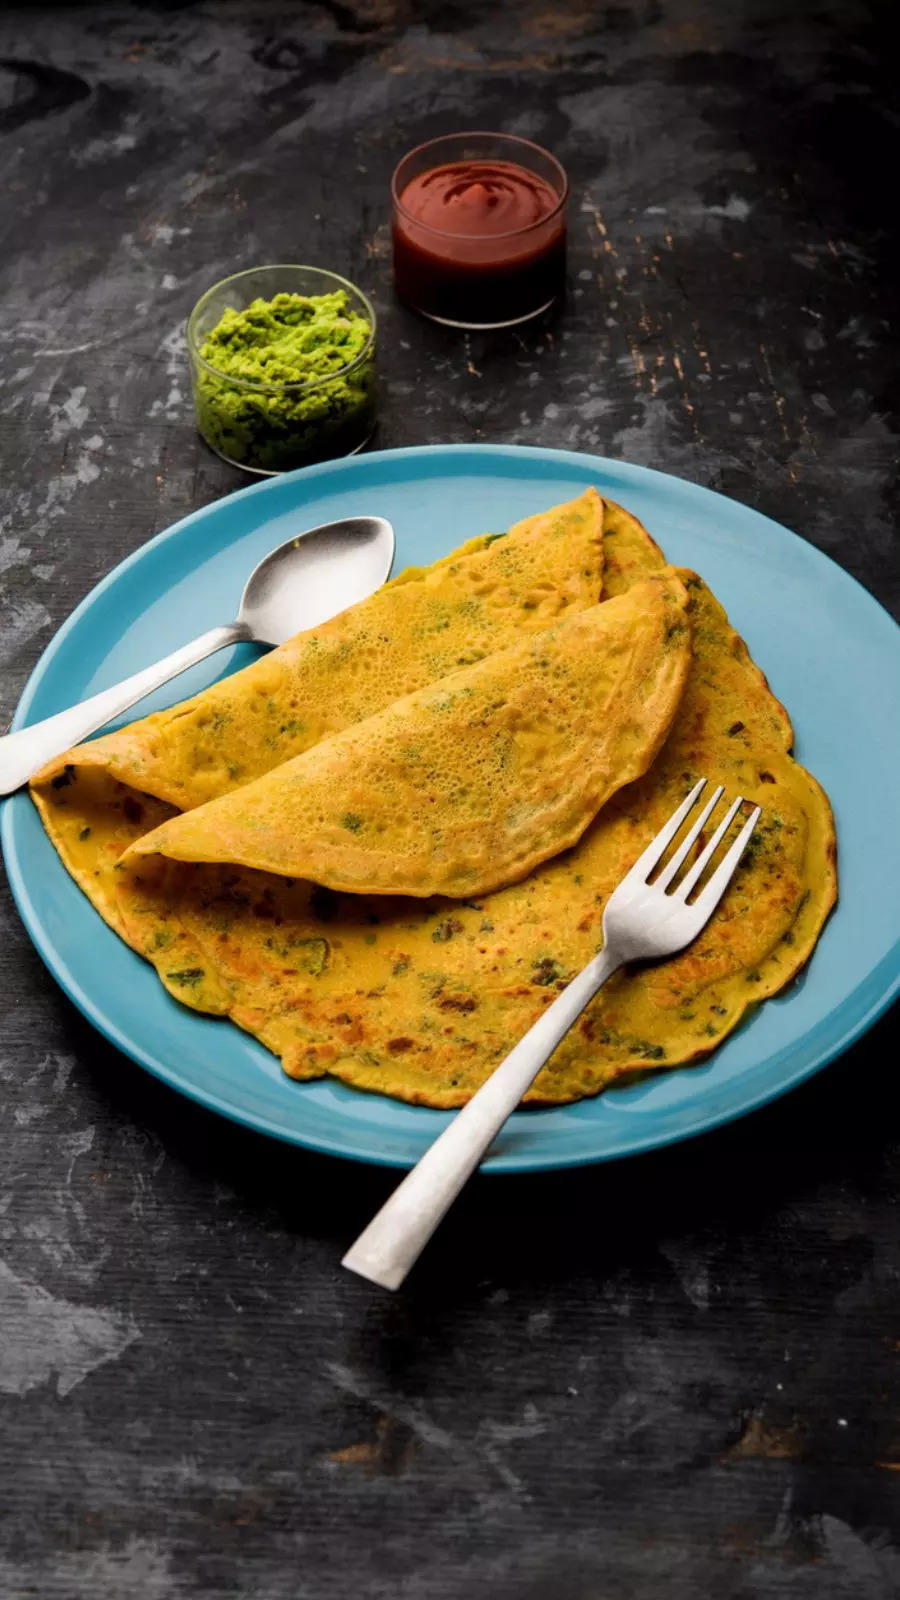 5-minute healthy Indian breakfast recipe to start your day